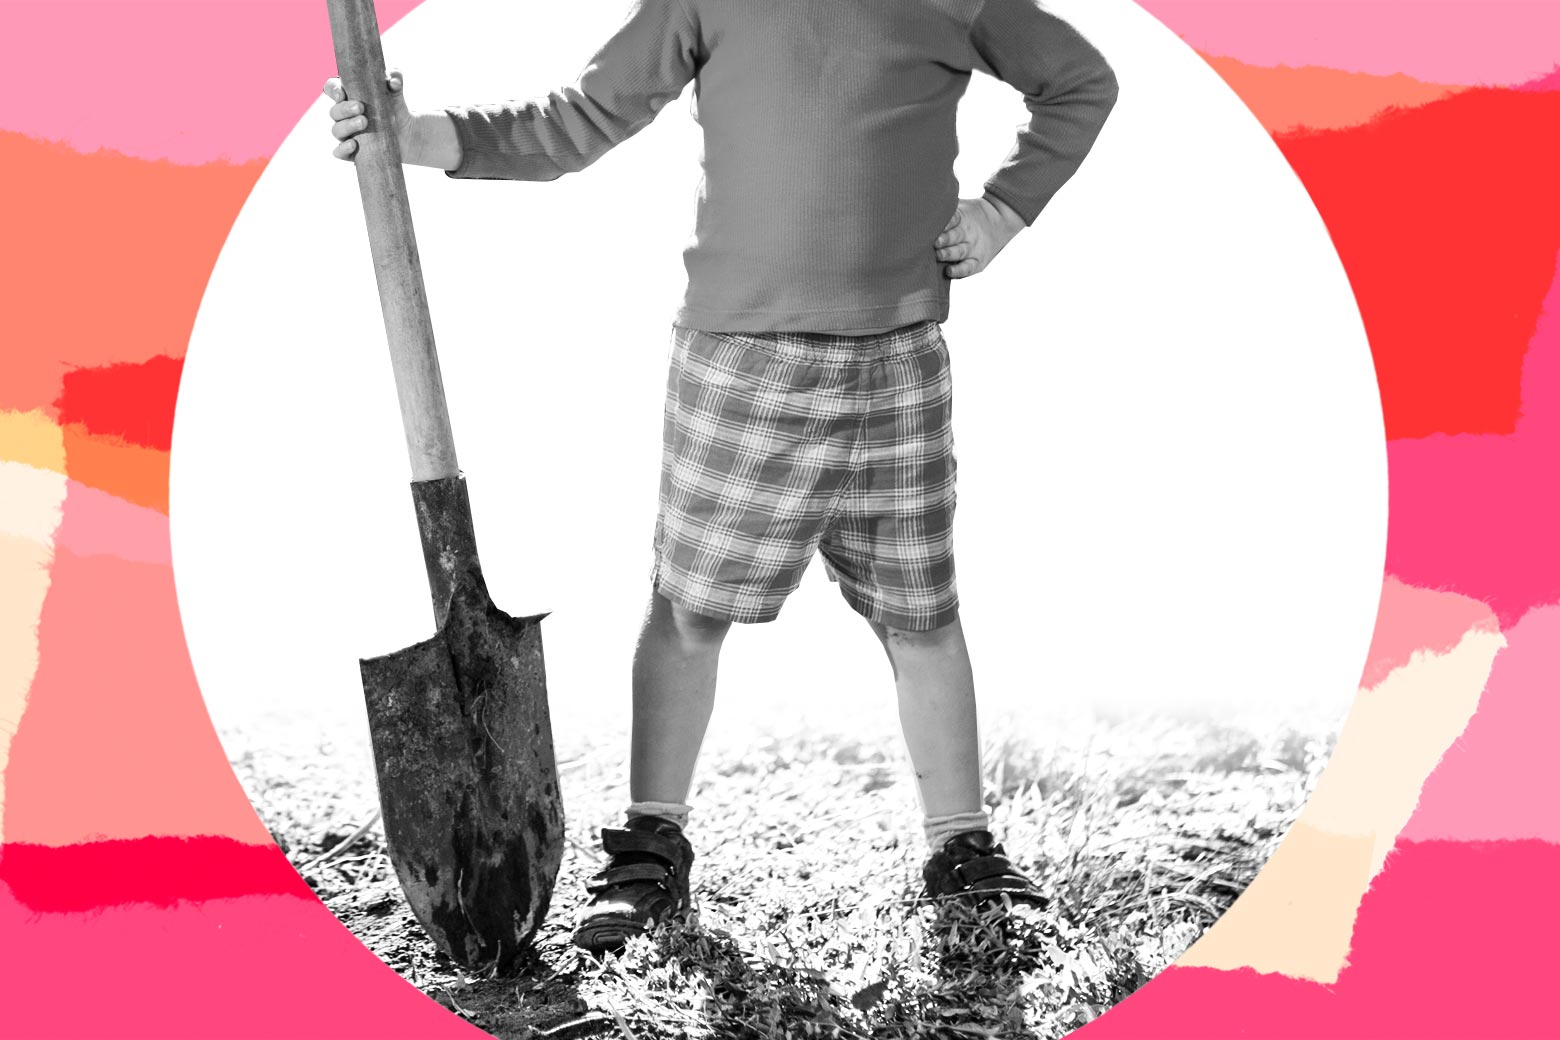 Girl proudly holding a shovel in the dirt.